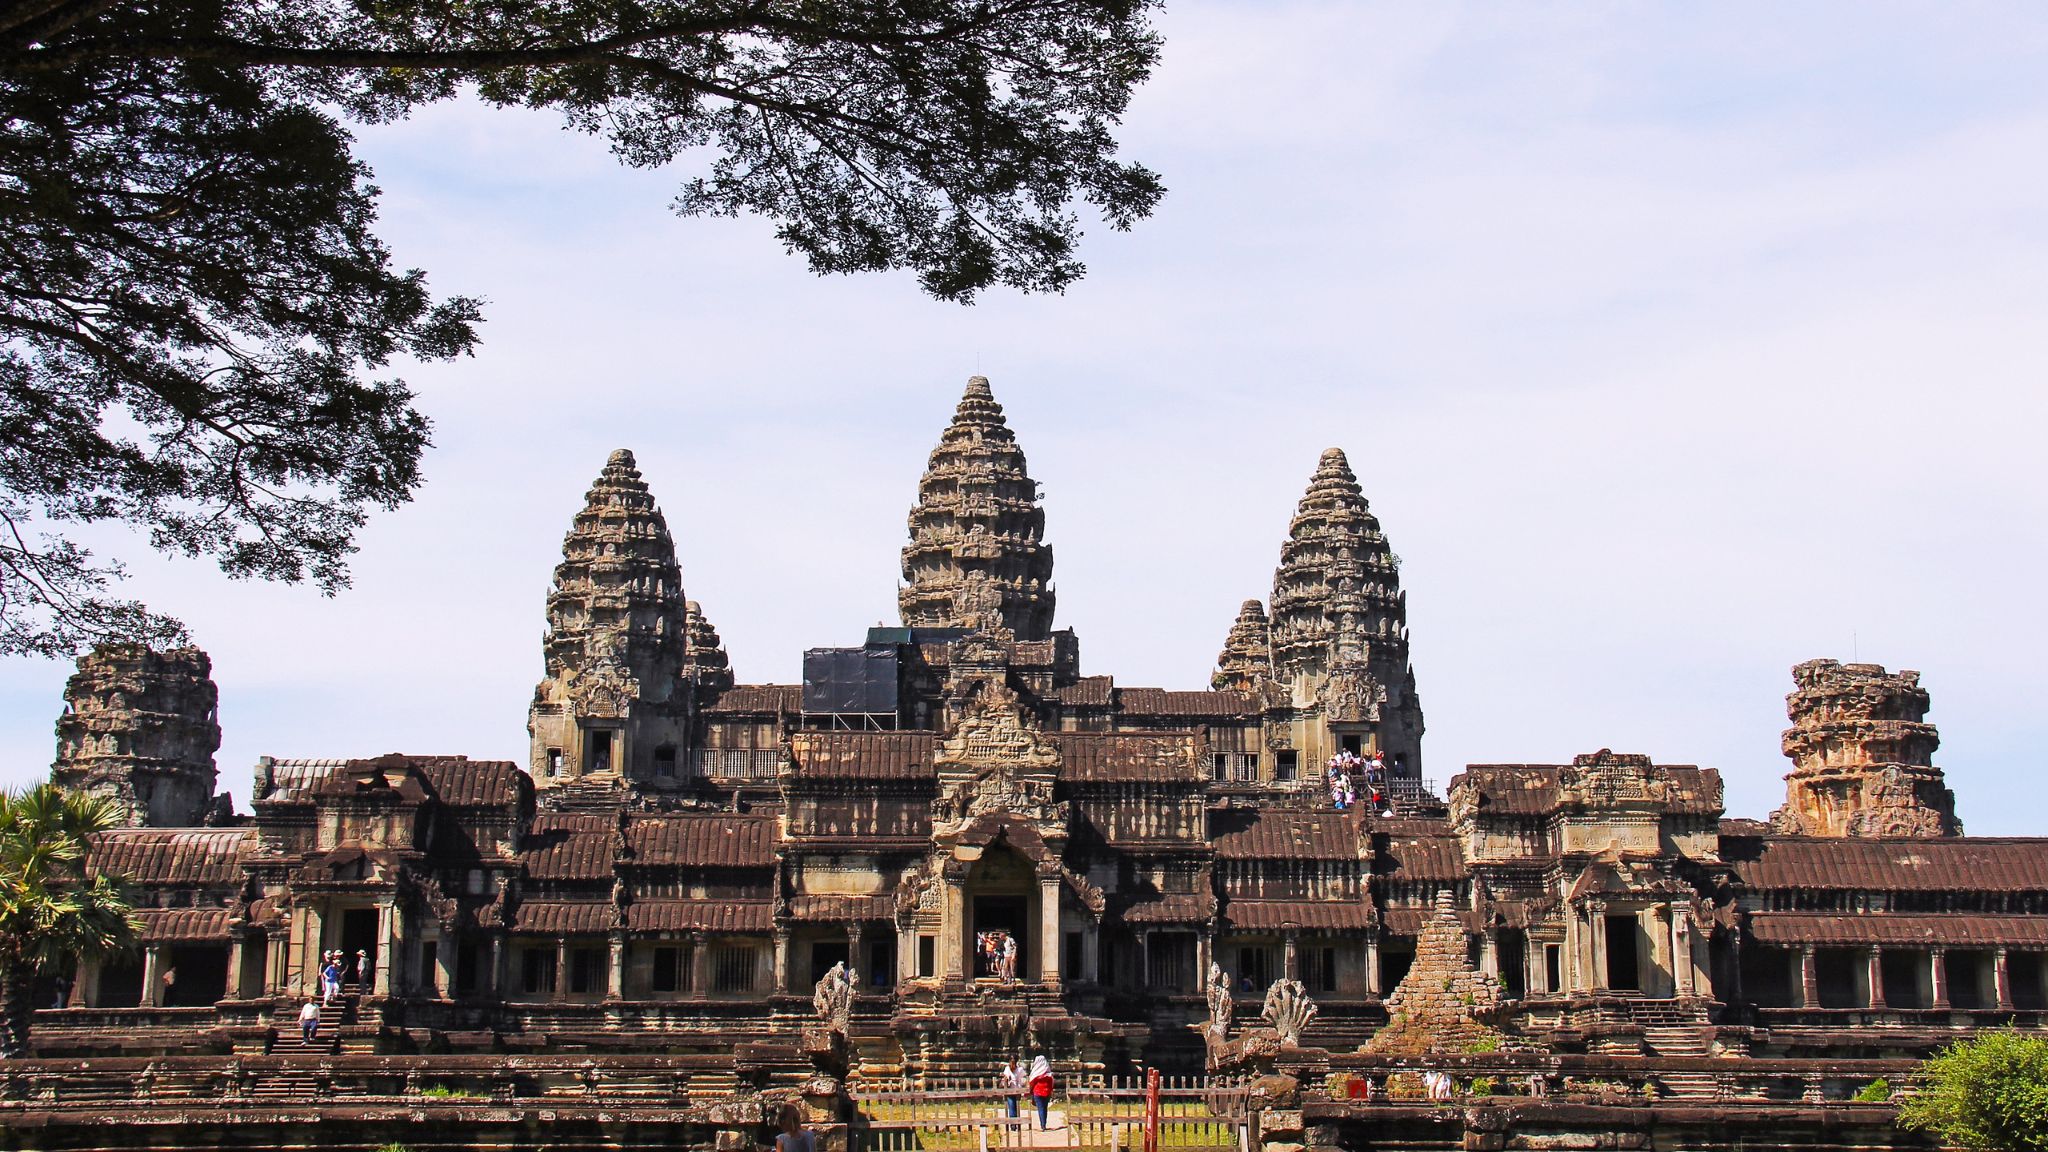 Day 2 Exploring Angkor Wat, The Most Famous Of All The Temples On The Angkor Plain